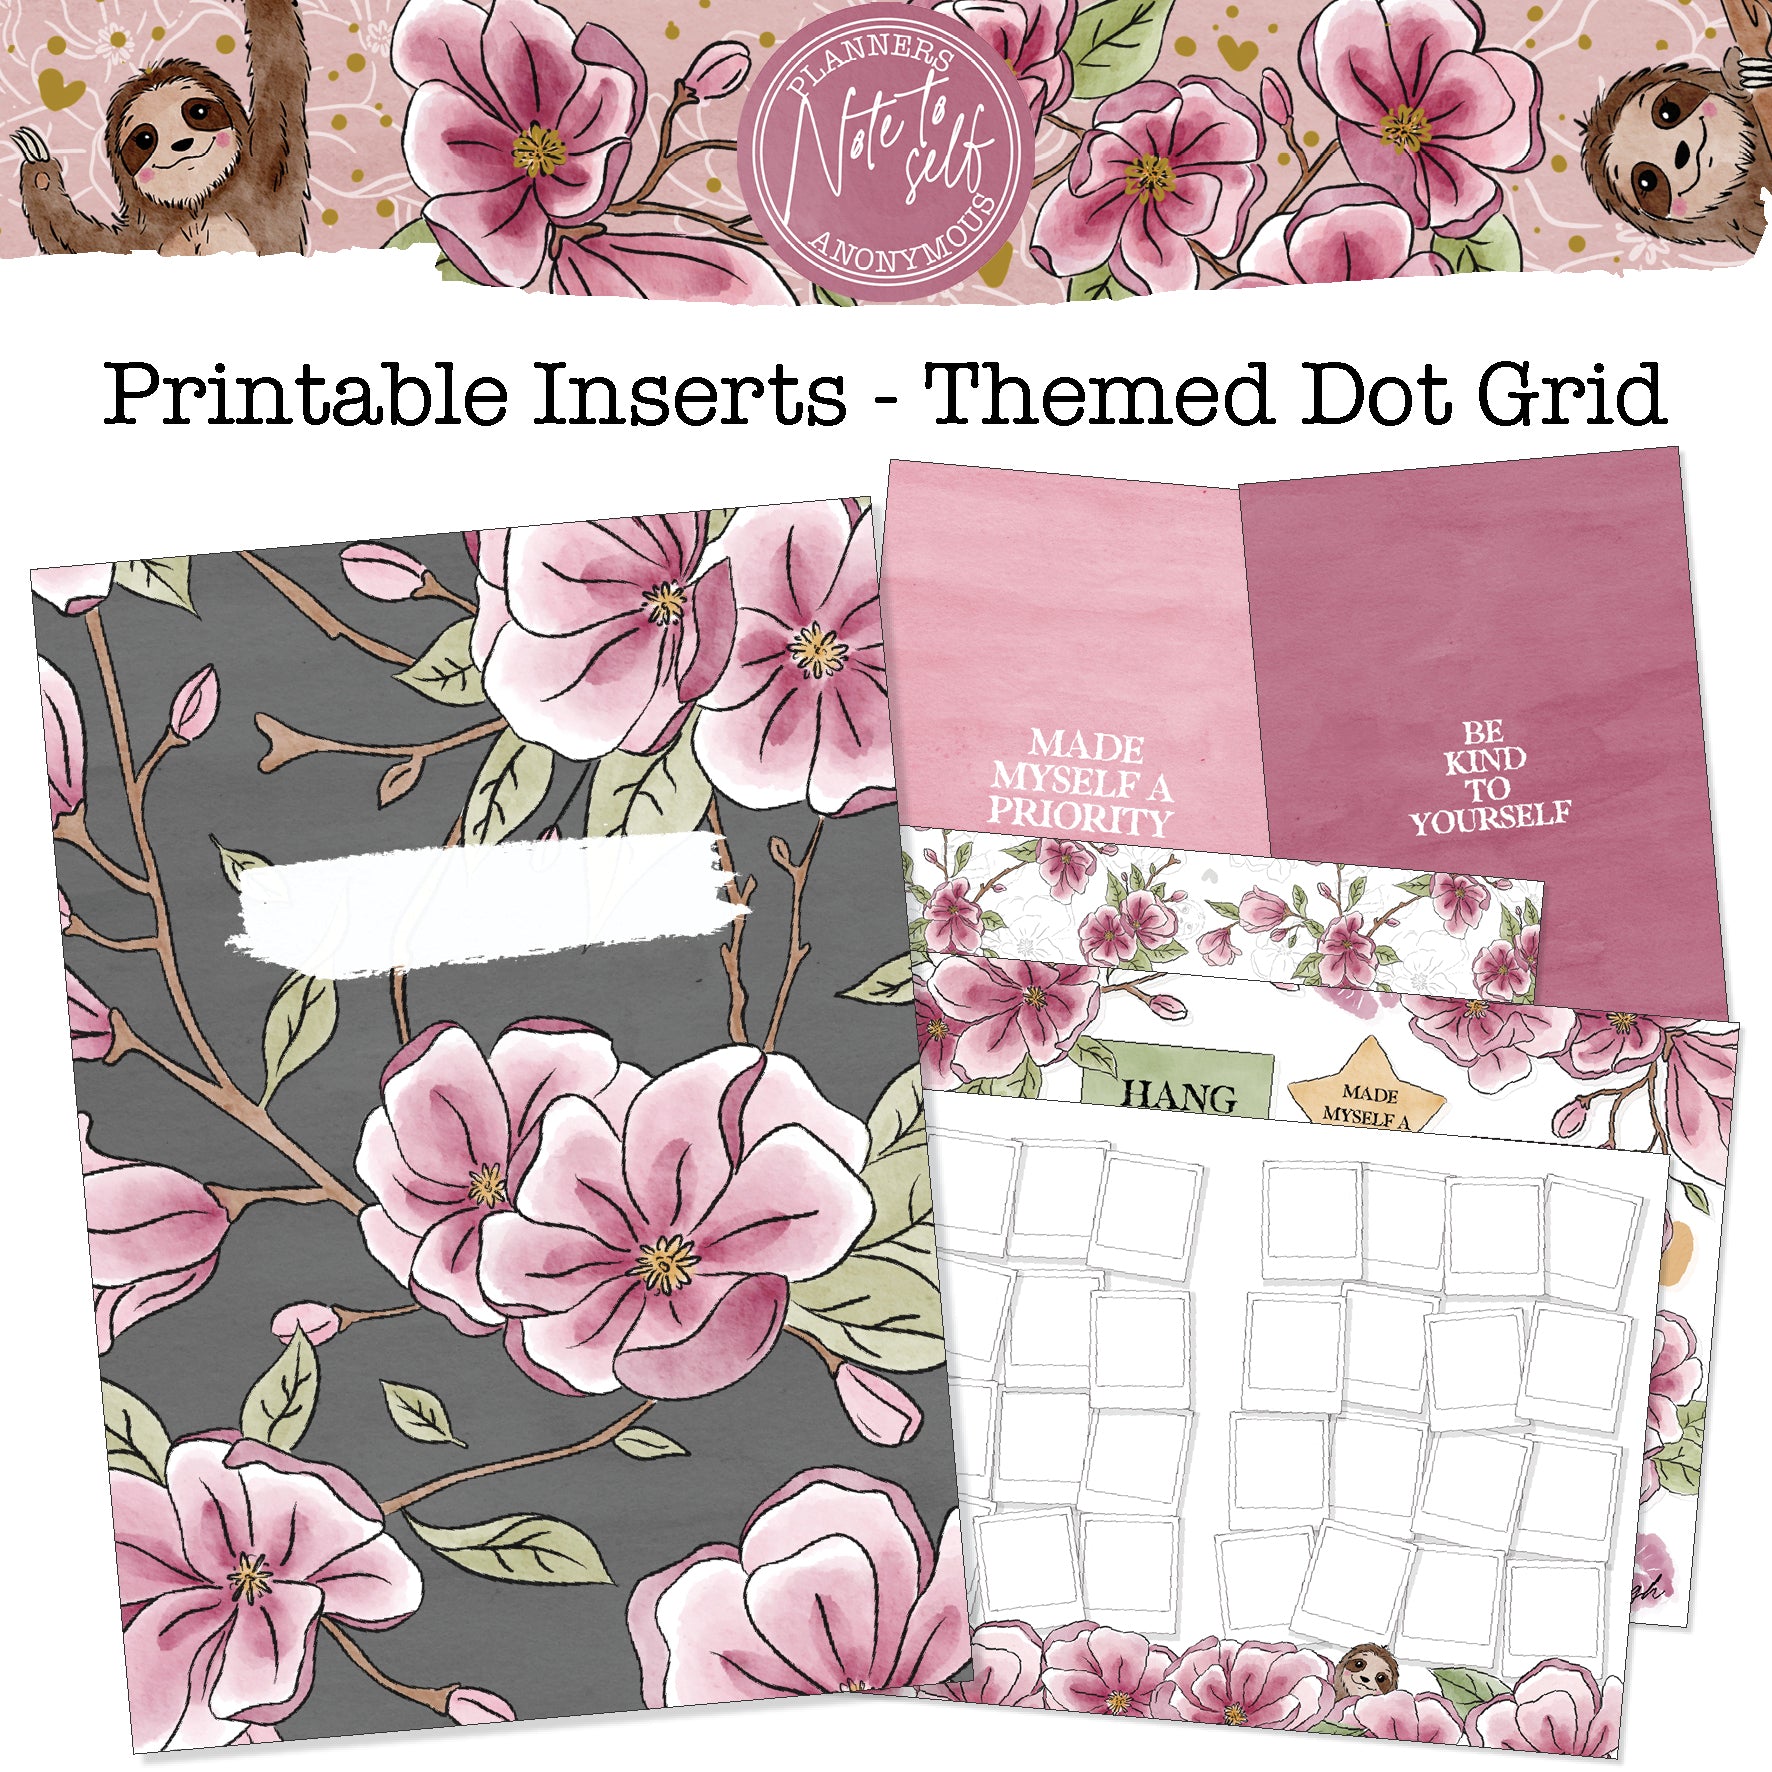 Note to Self Printable Inserts - Themed Dot Grid